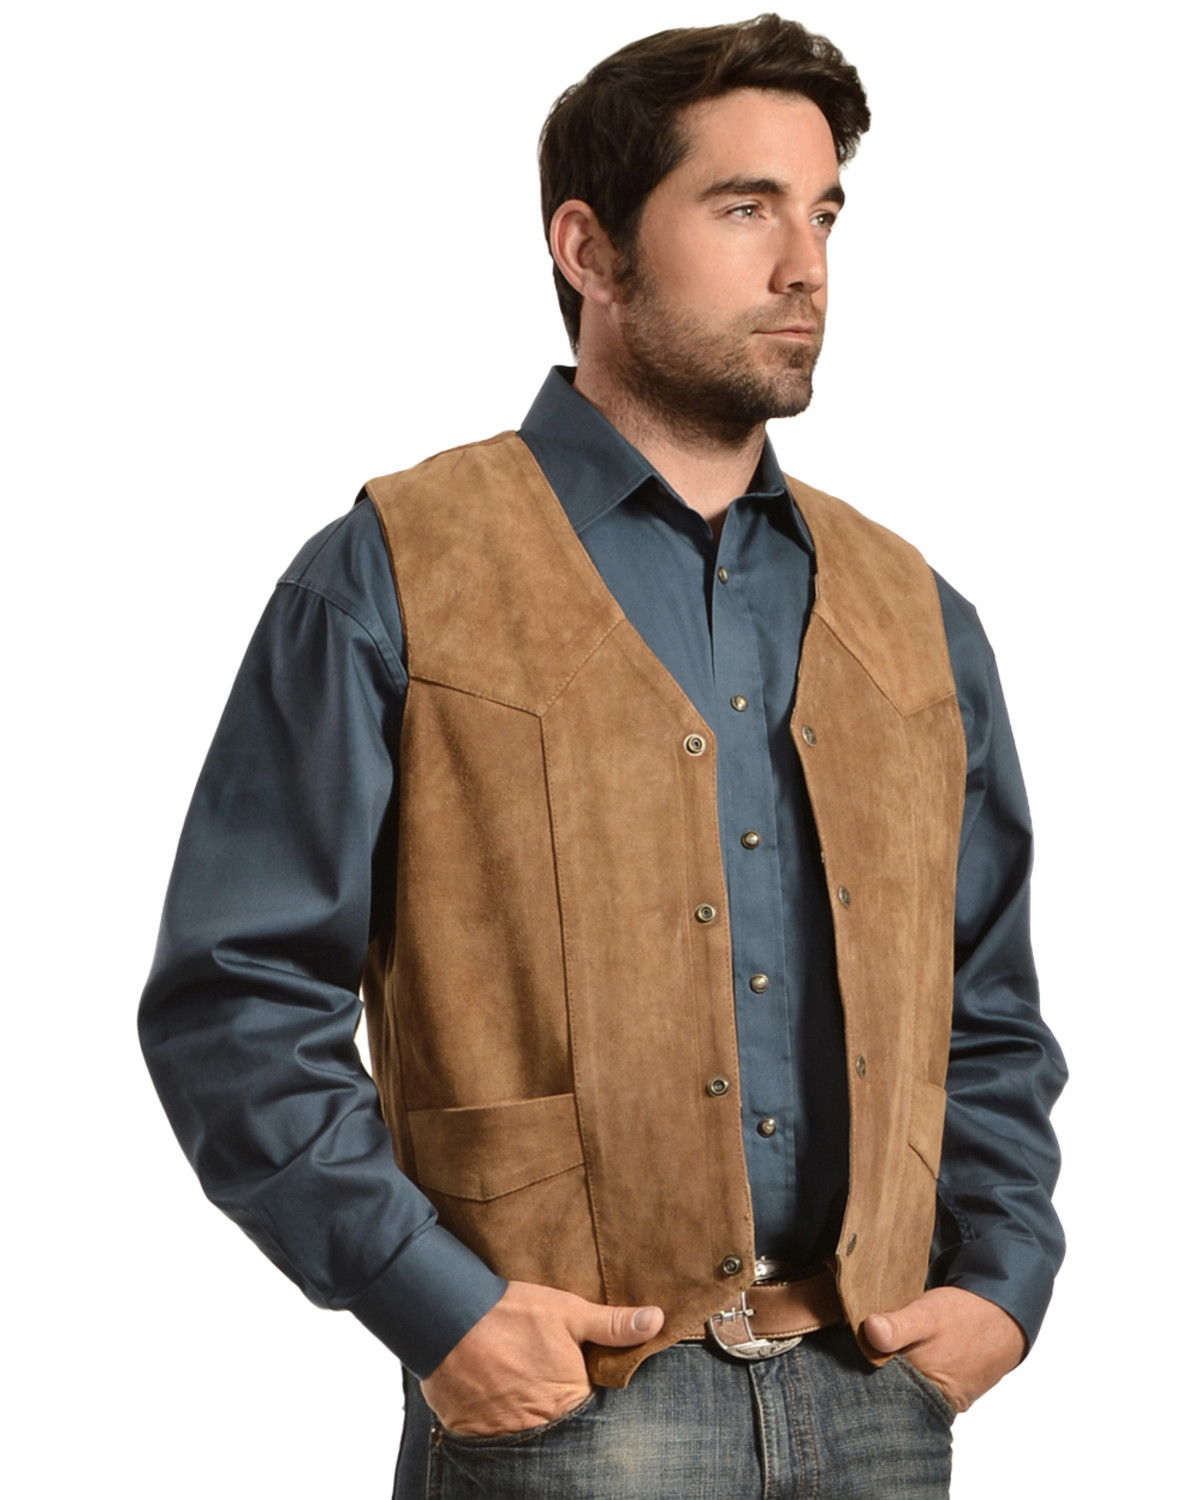 Liberty Wear Men's Suede Western Vest - Country Outfitter